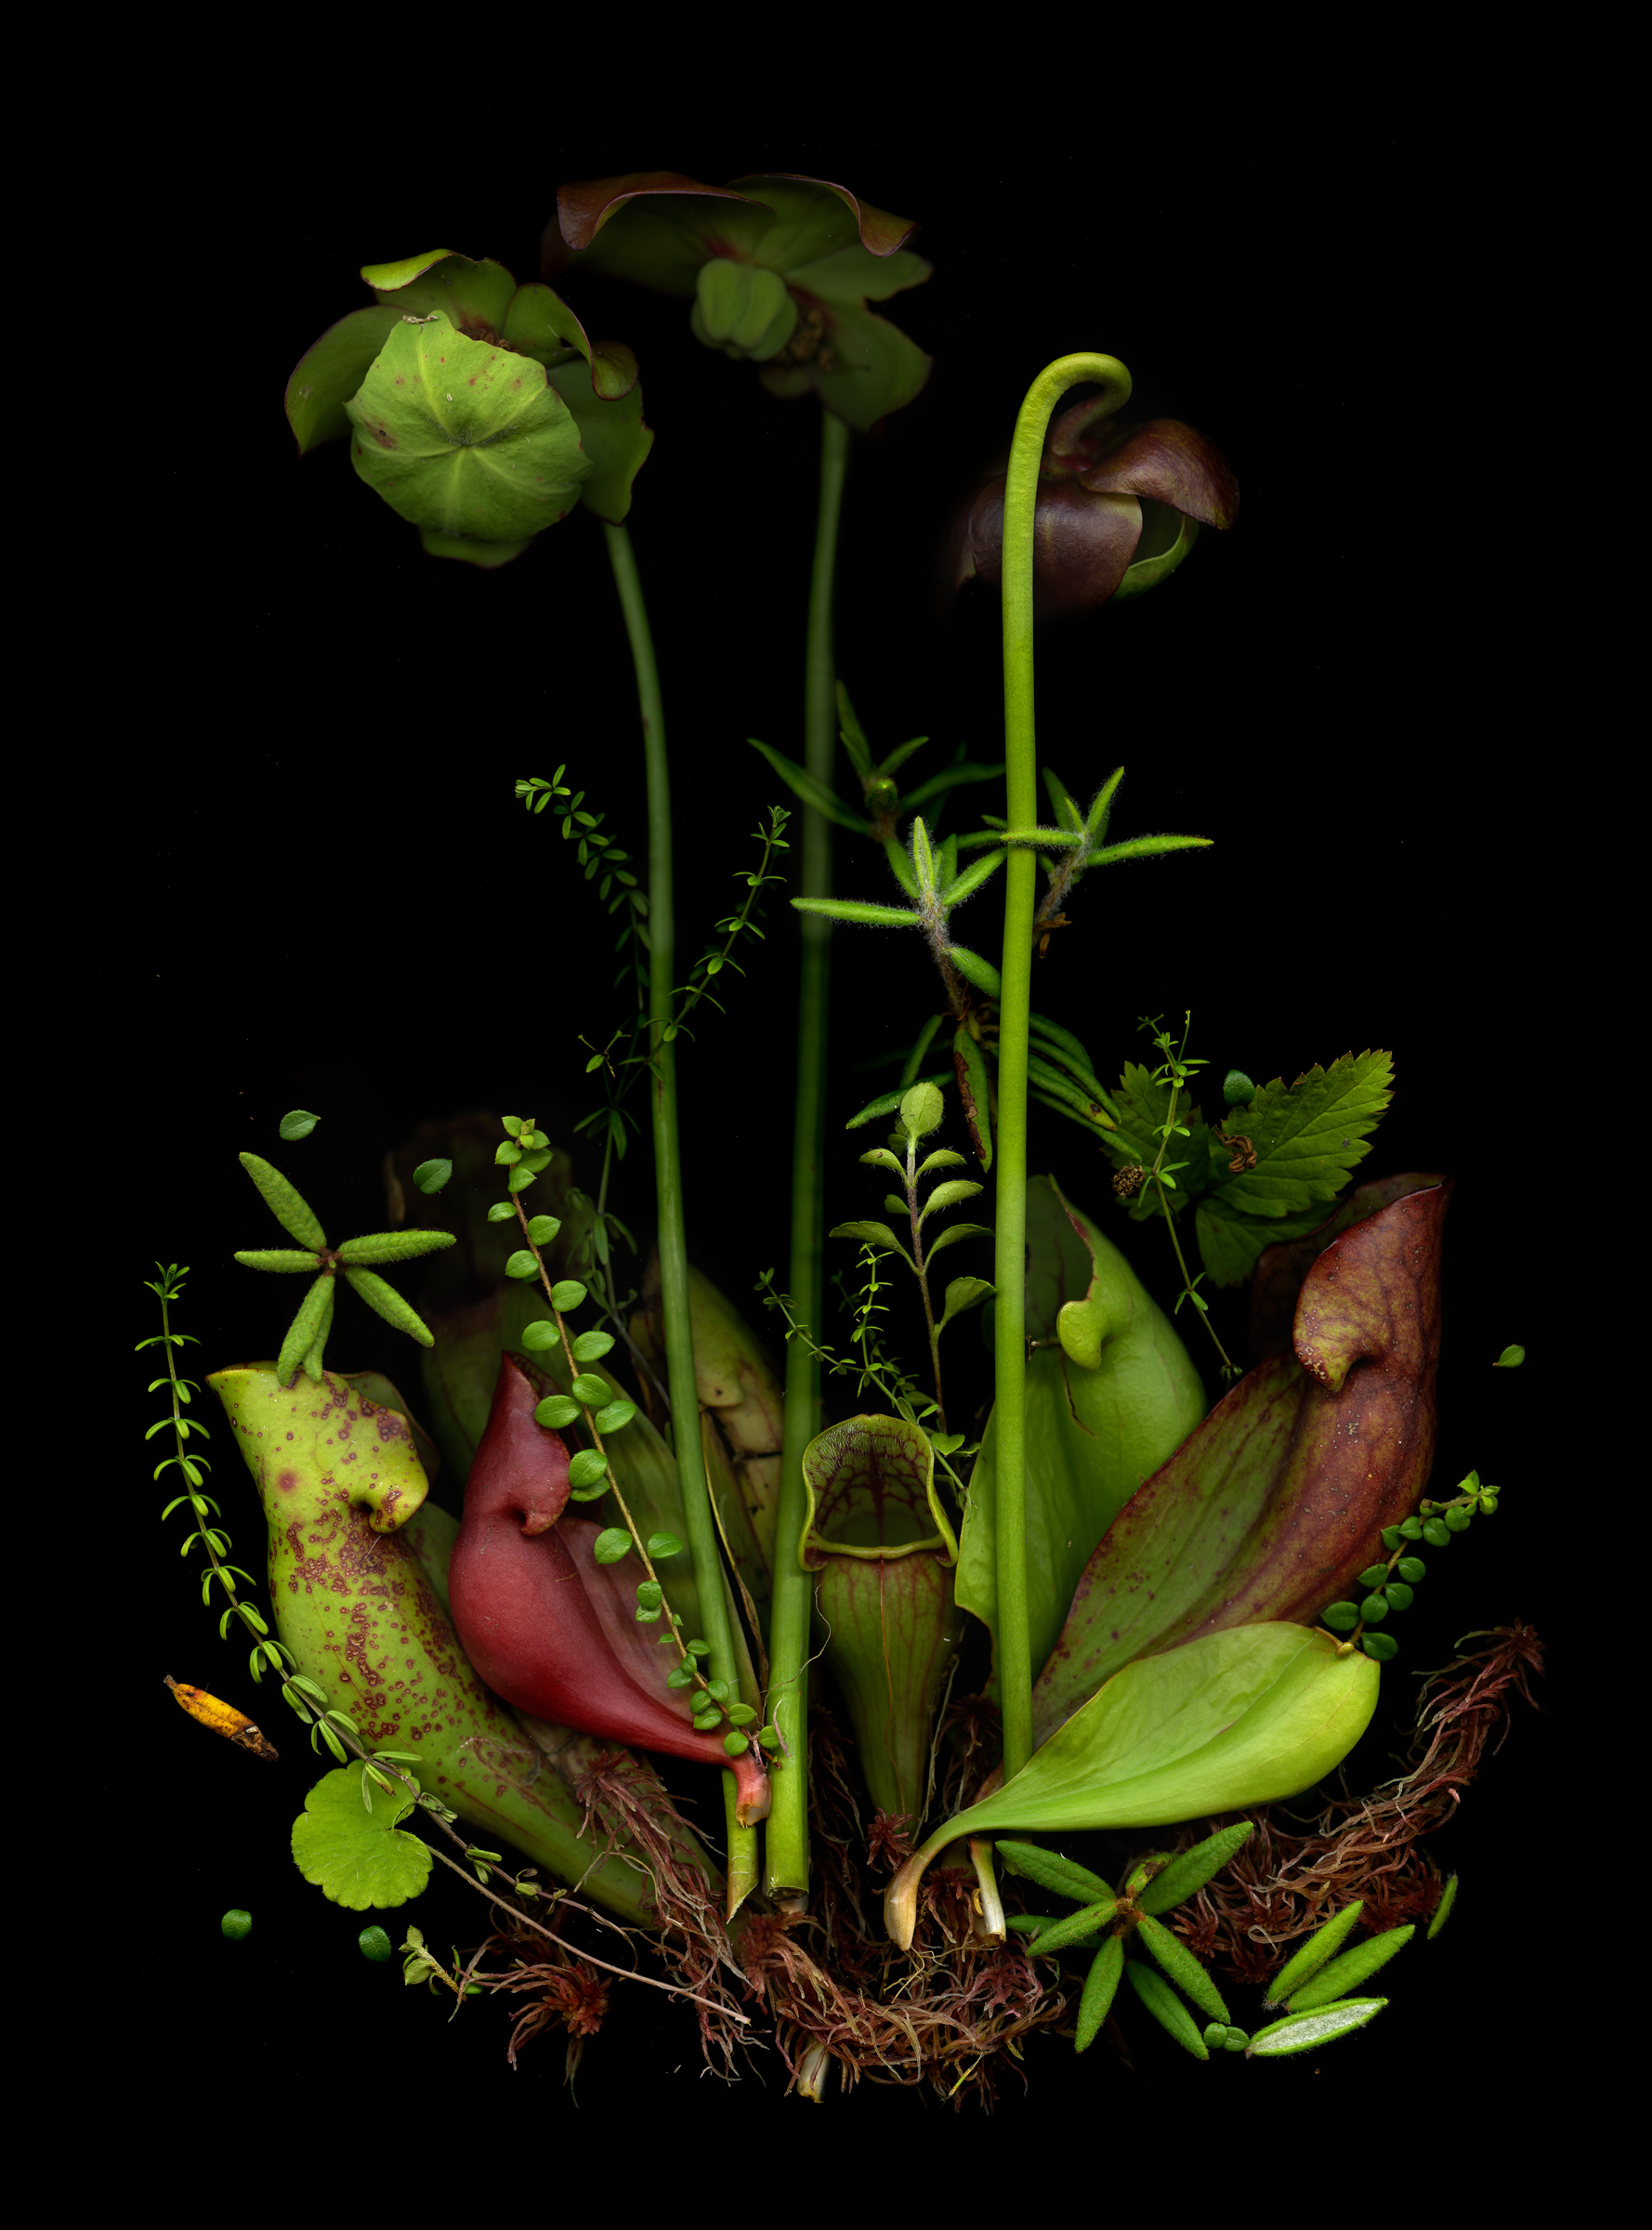 Julya Hajnoczky, Sarracenia purpurea, 2023, from the series At the Last Judgement, We Will All Be Trees. Courtesy of the artist and Prefix Institute of Contemporary Art, Toronto